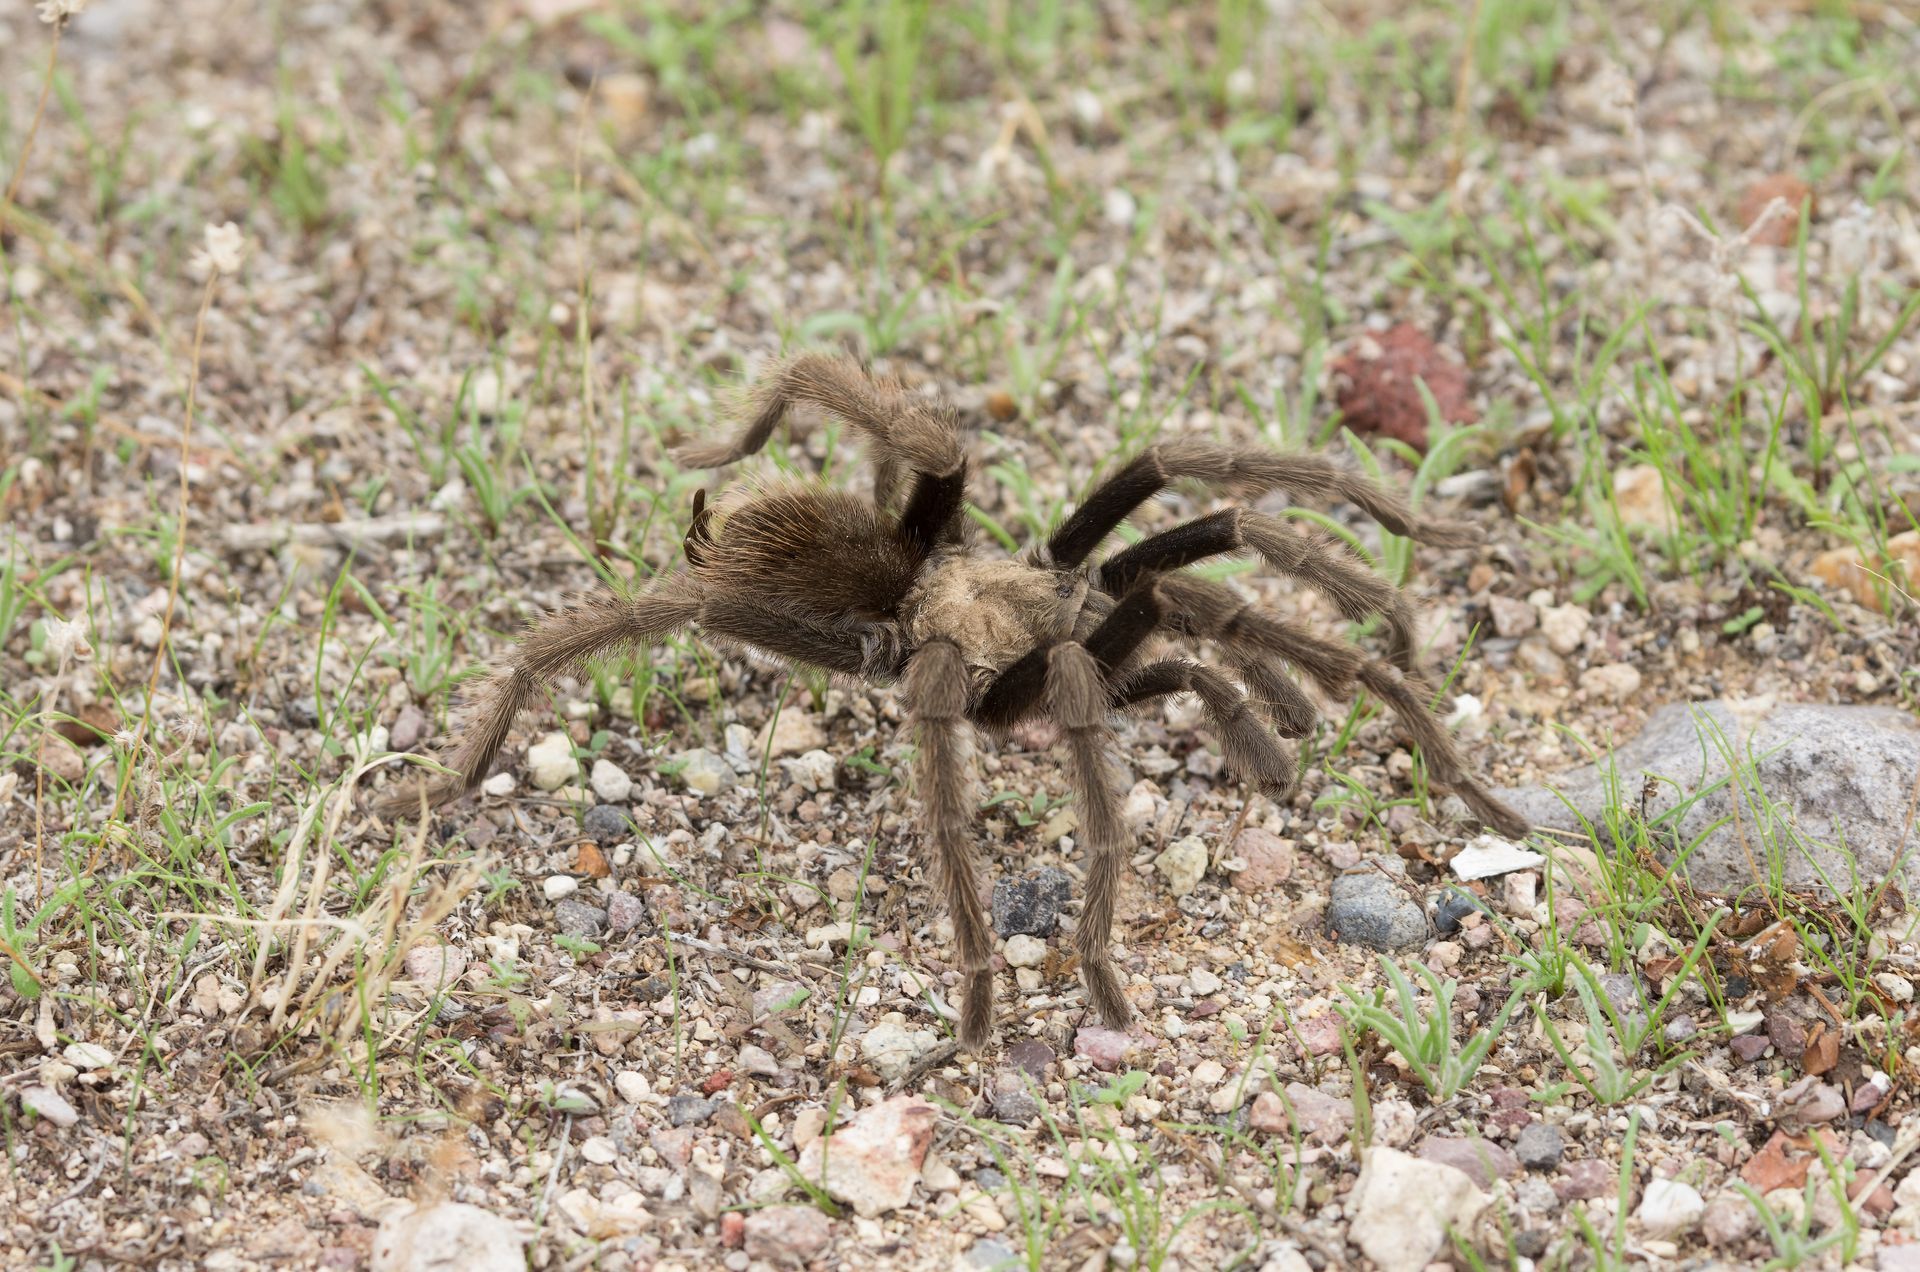 What Eats Spiders? Our Guide To Natural Spider Prevention